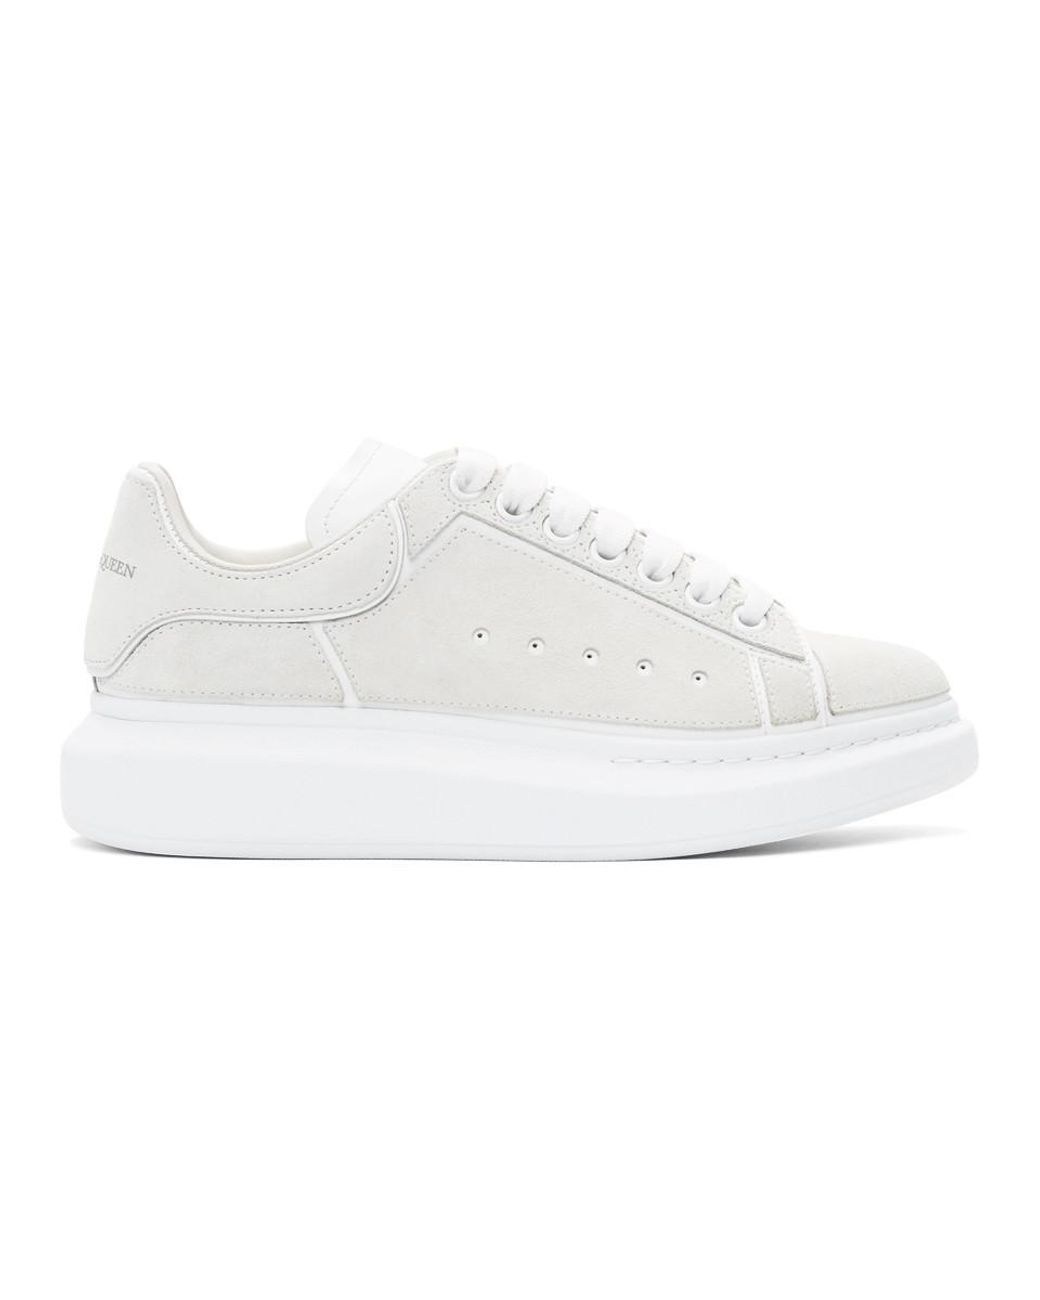 Alexander McQueen Leather White And Grey Suede Paneled Oversized ...